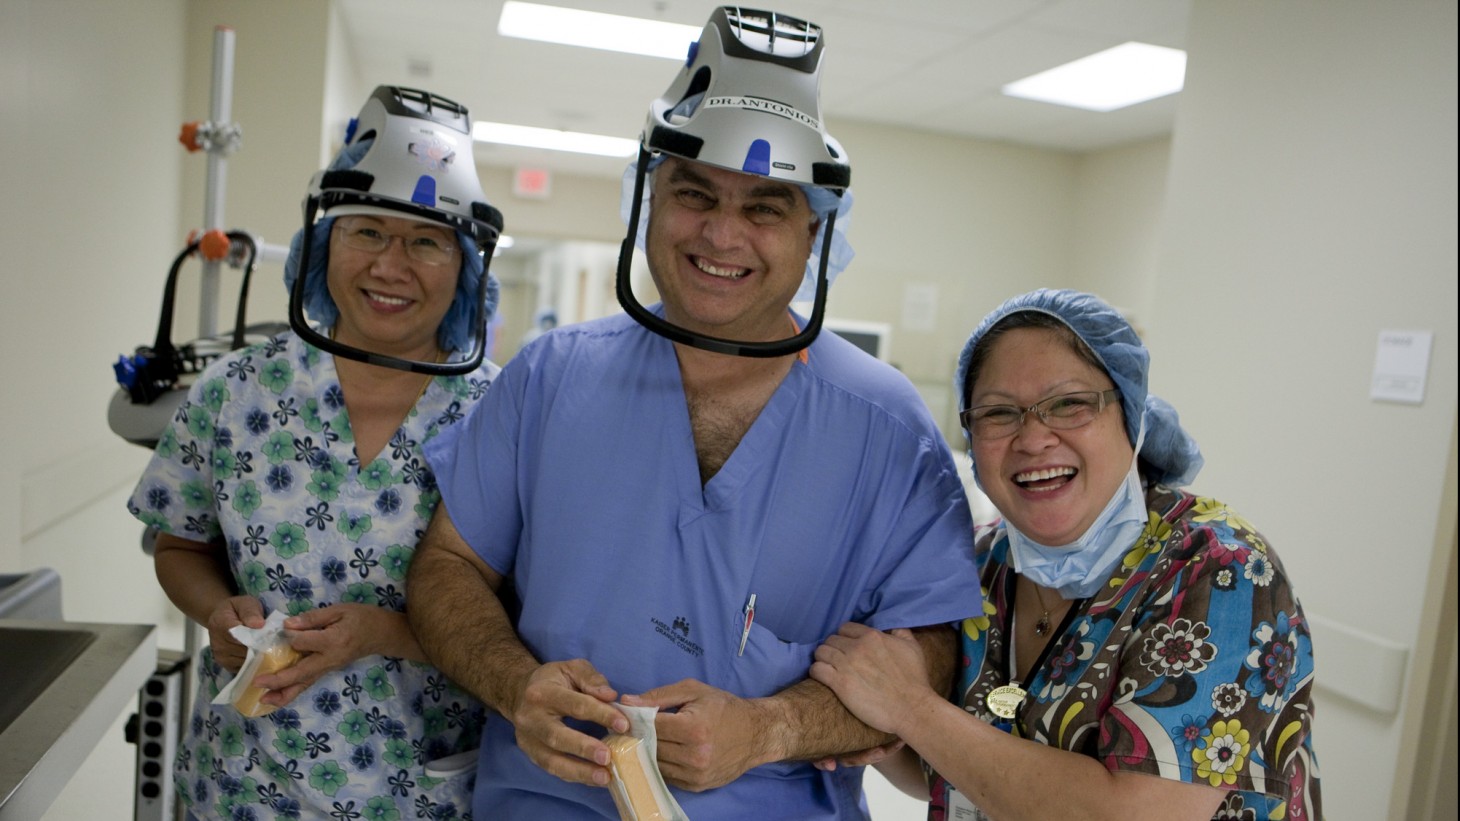 Three smiling health care workers, wearing interesting hats